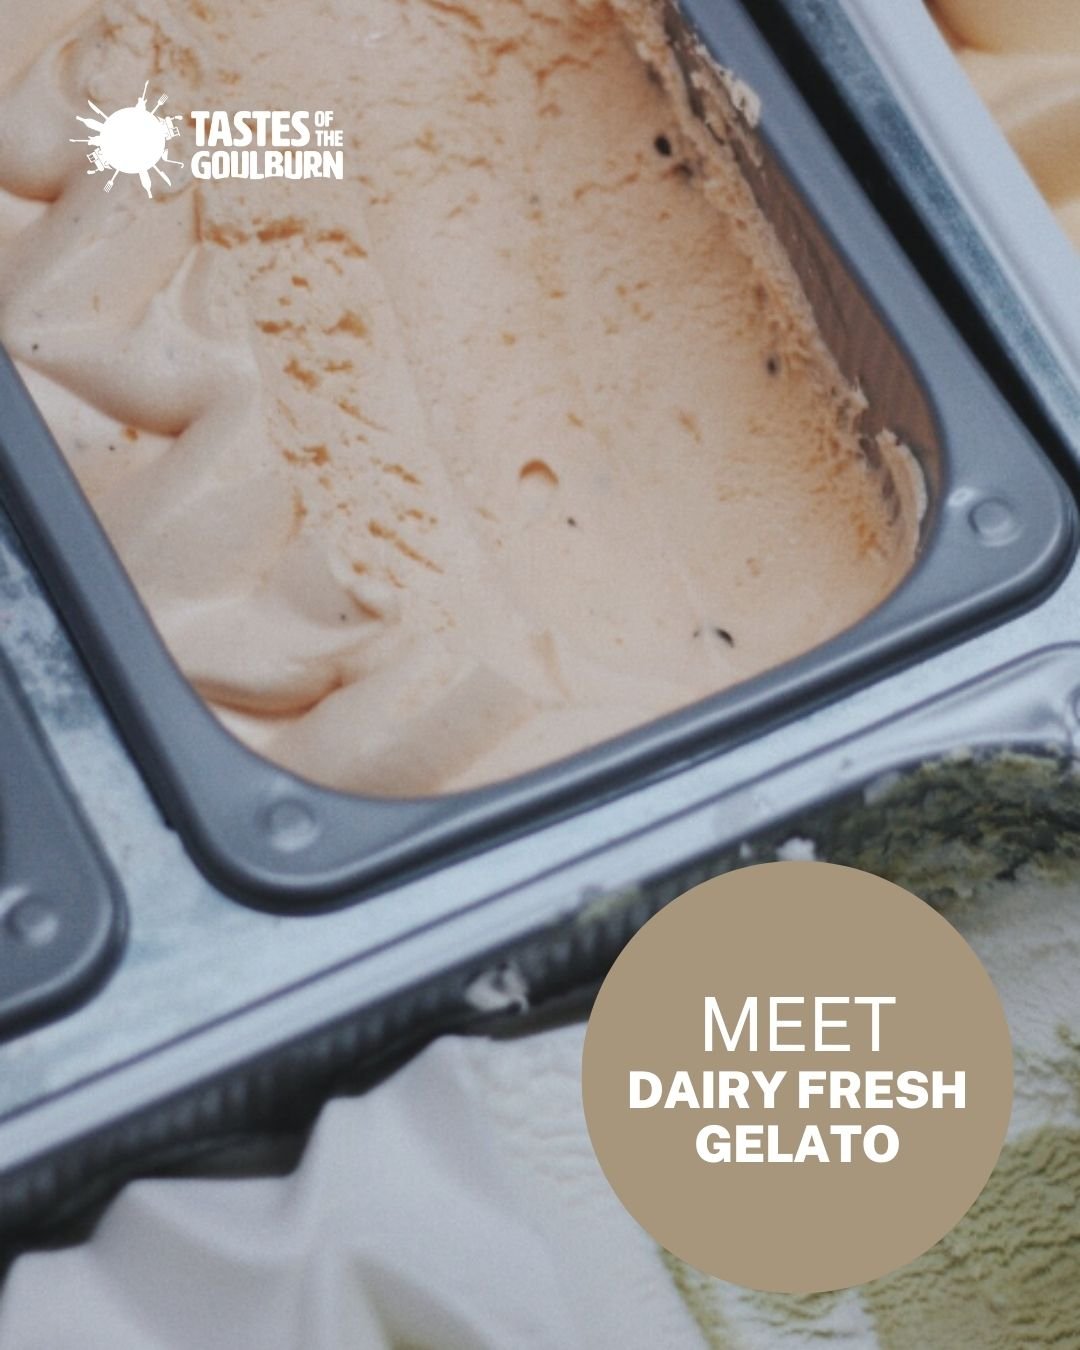 🍨🐄 Cool down with a scoop of traditional gelato at Tastes of the Goulburn on Saturday, 27 April, with Dairy Fresh Gelato! 

Nestled in the heart of Australia's Goulburn Valley dairy region, Dairy Fresh is a family-run, certified organic dairy farm 